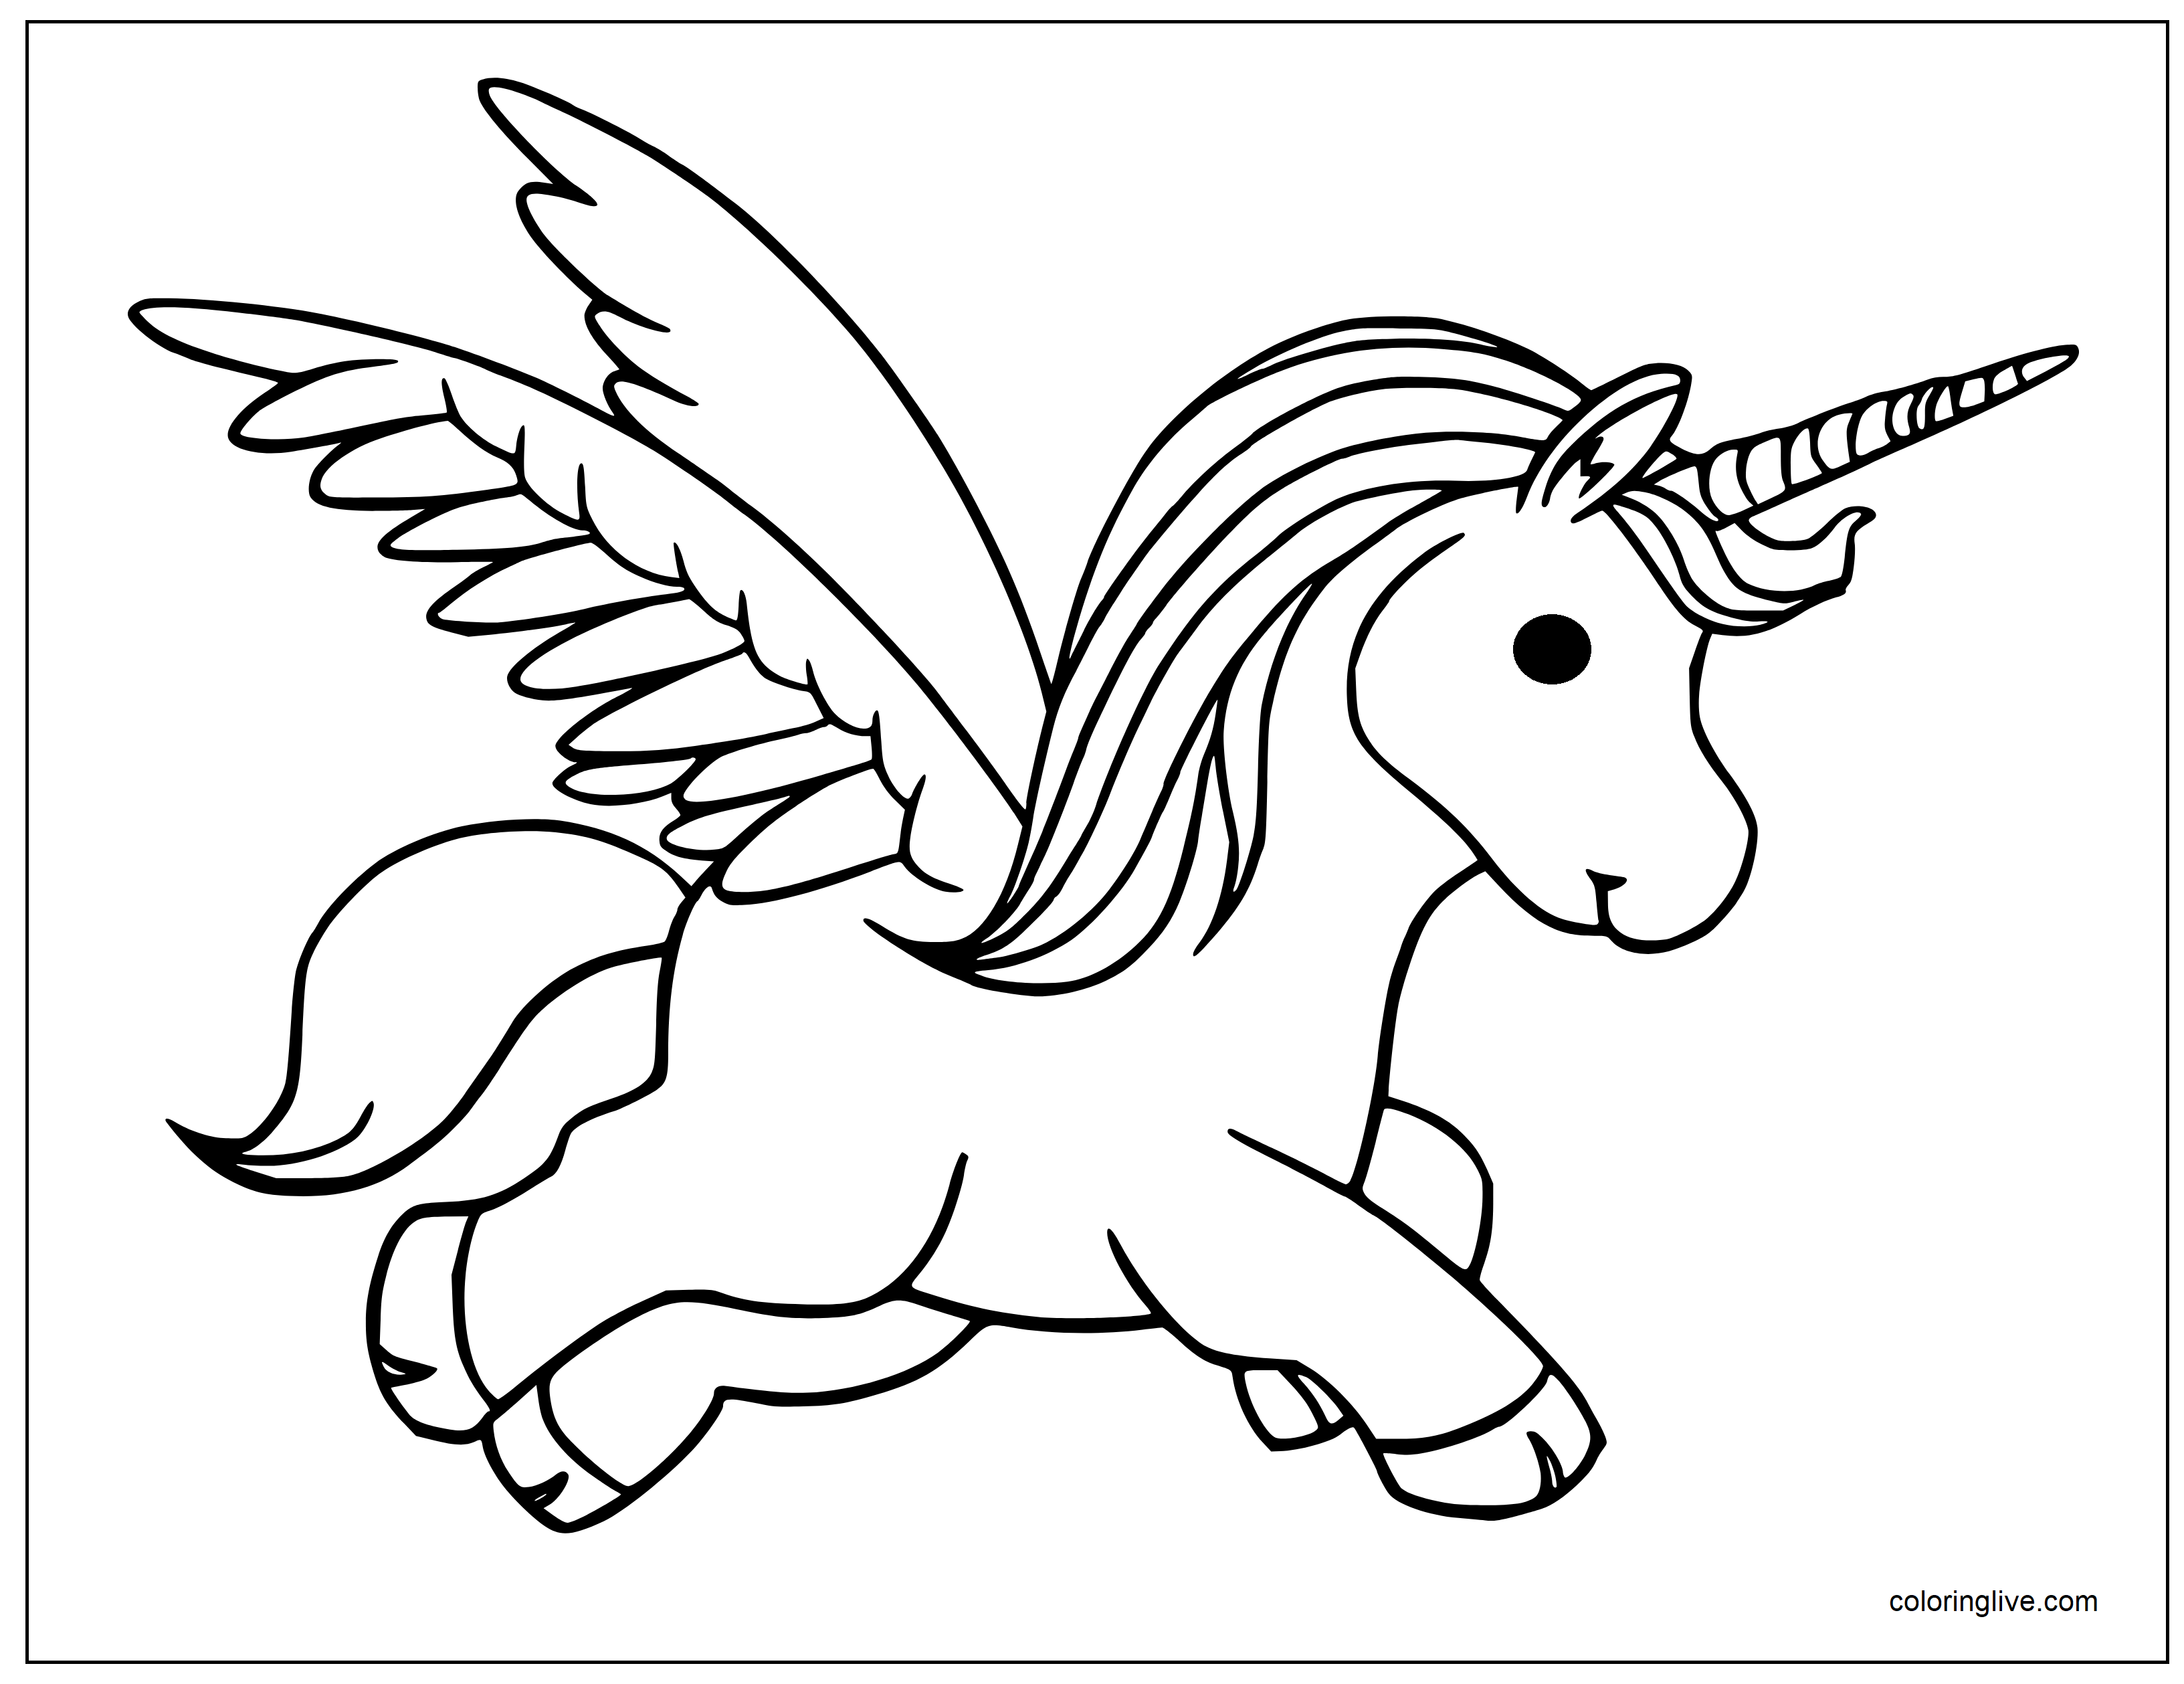 Printable a  Alicorn Coloring Page for kids.